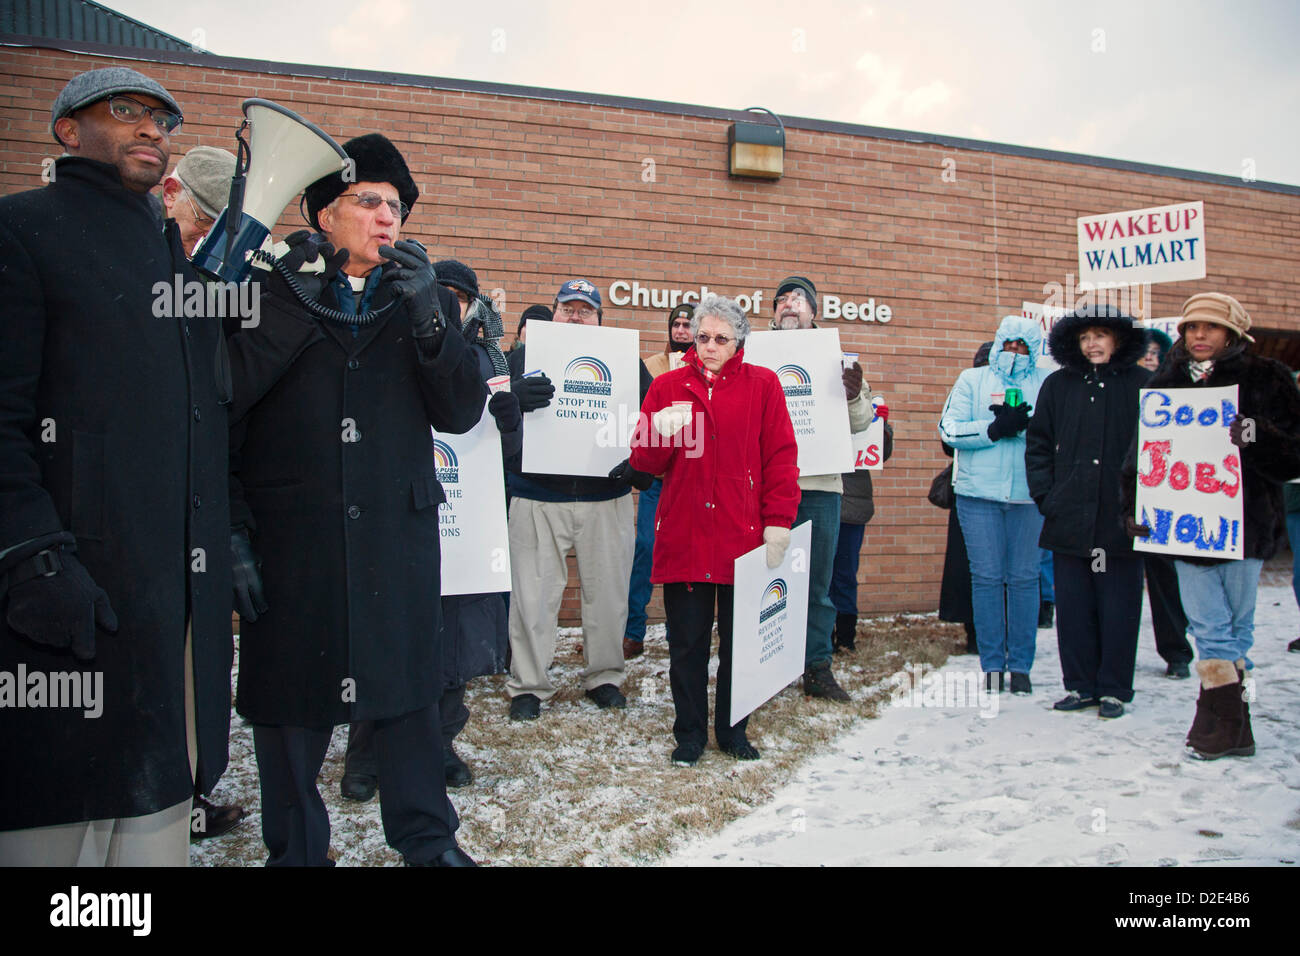 Southfield, Michigan - January 21, 2013 - Fr. Norm Thomas speaks to a 'Guns Out & Jobs In' vigil at the Church of St. Bede, opposing a plan to tear down the church to build a Walmart store. Organizers noted that Walmart is the biggest gun distributor in America, and that the retailer's jobs pay less than a living wage. The church has been vacant since the Archdiocese of Detroit merged four Catholic churches in 2007. Stock Photo